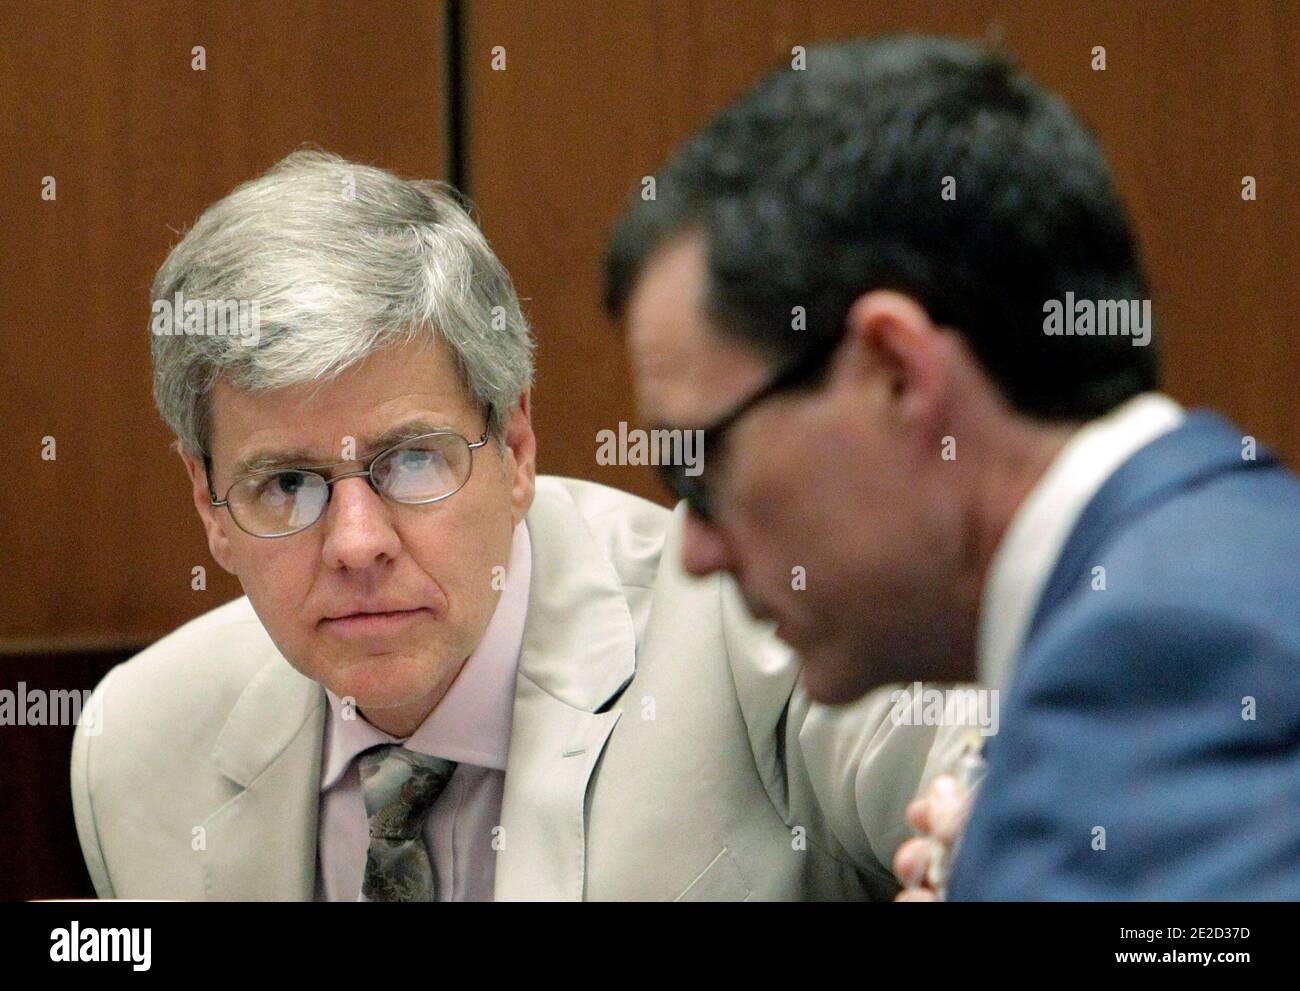 Anesthesiology expert Dr. Steven Shafer, left, listens as he is cross examined by Ed Chernoff, right, a defense attorney for Dr. Conrad Murray, during Murray's involuntary manslaughter trial in Los Angeles, CA, USA, on October 21, 2011. Murray has pleaded not guilty and faces four years in prison and the loss of his medical license if convicted of involuntary manslaughter in Michael Jackson's death. Photo by Reed Saxon/Pool/ABACAPRESS.COM Stock Photo